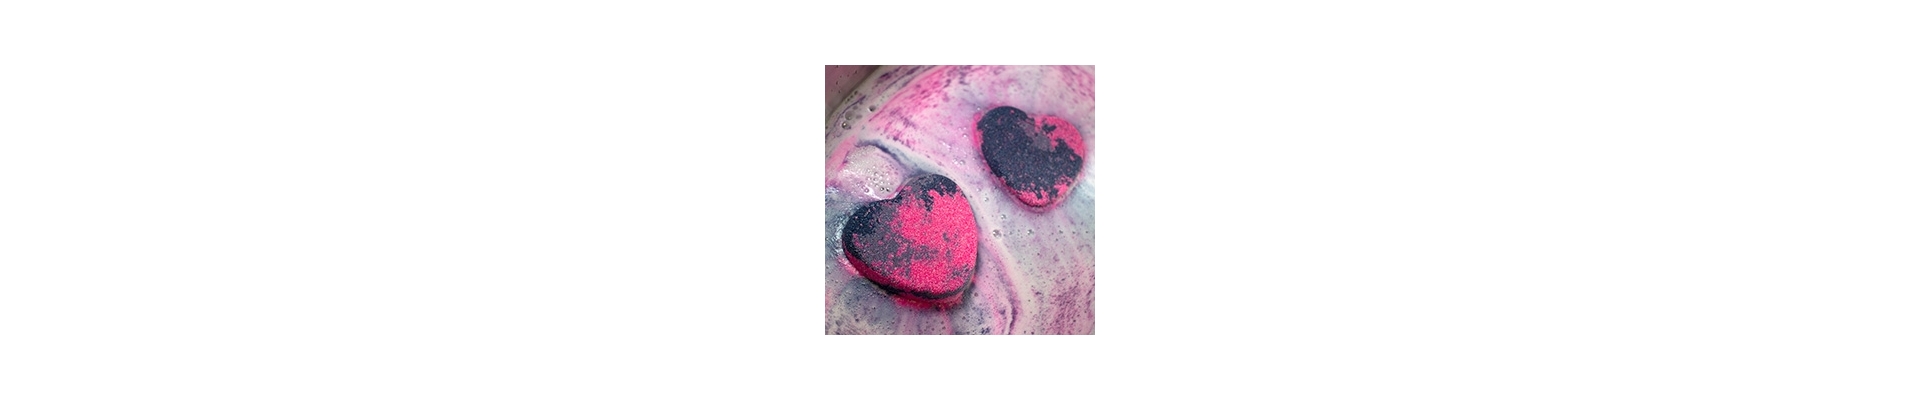 Our Extensive Range Of Bath Bomb Ingredients | The Soap Kitchen™